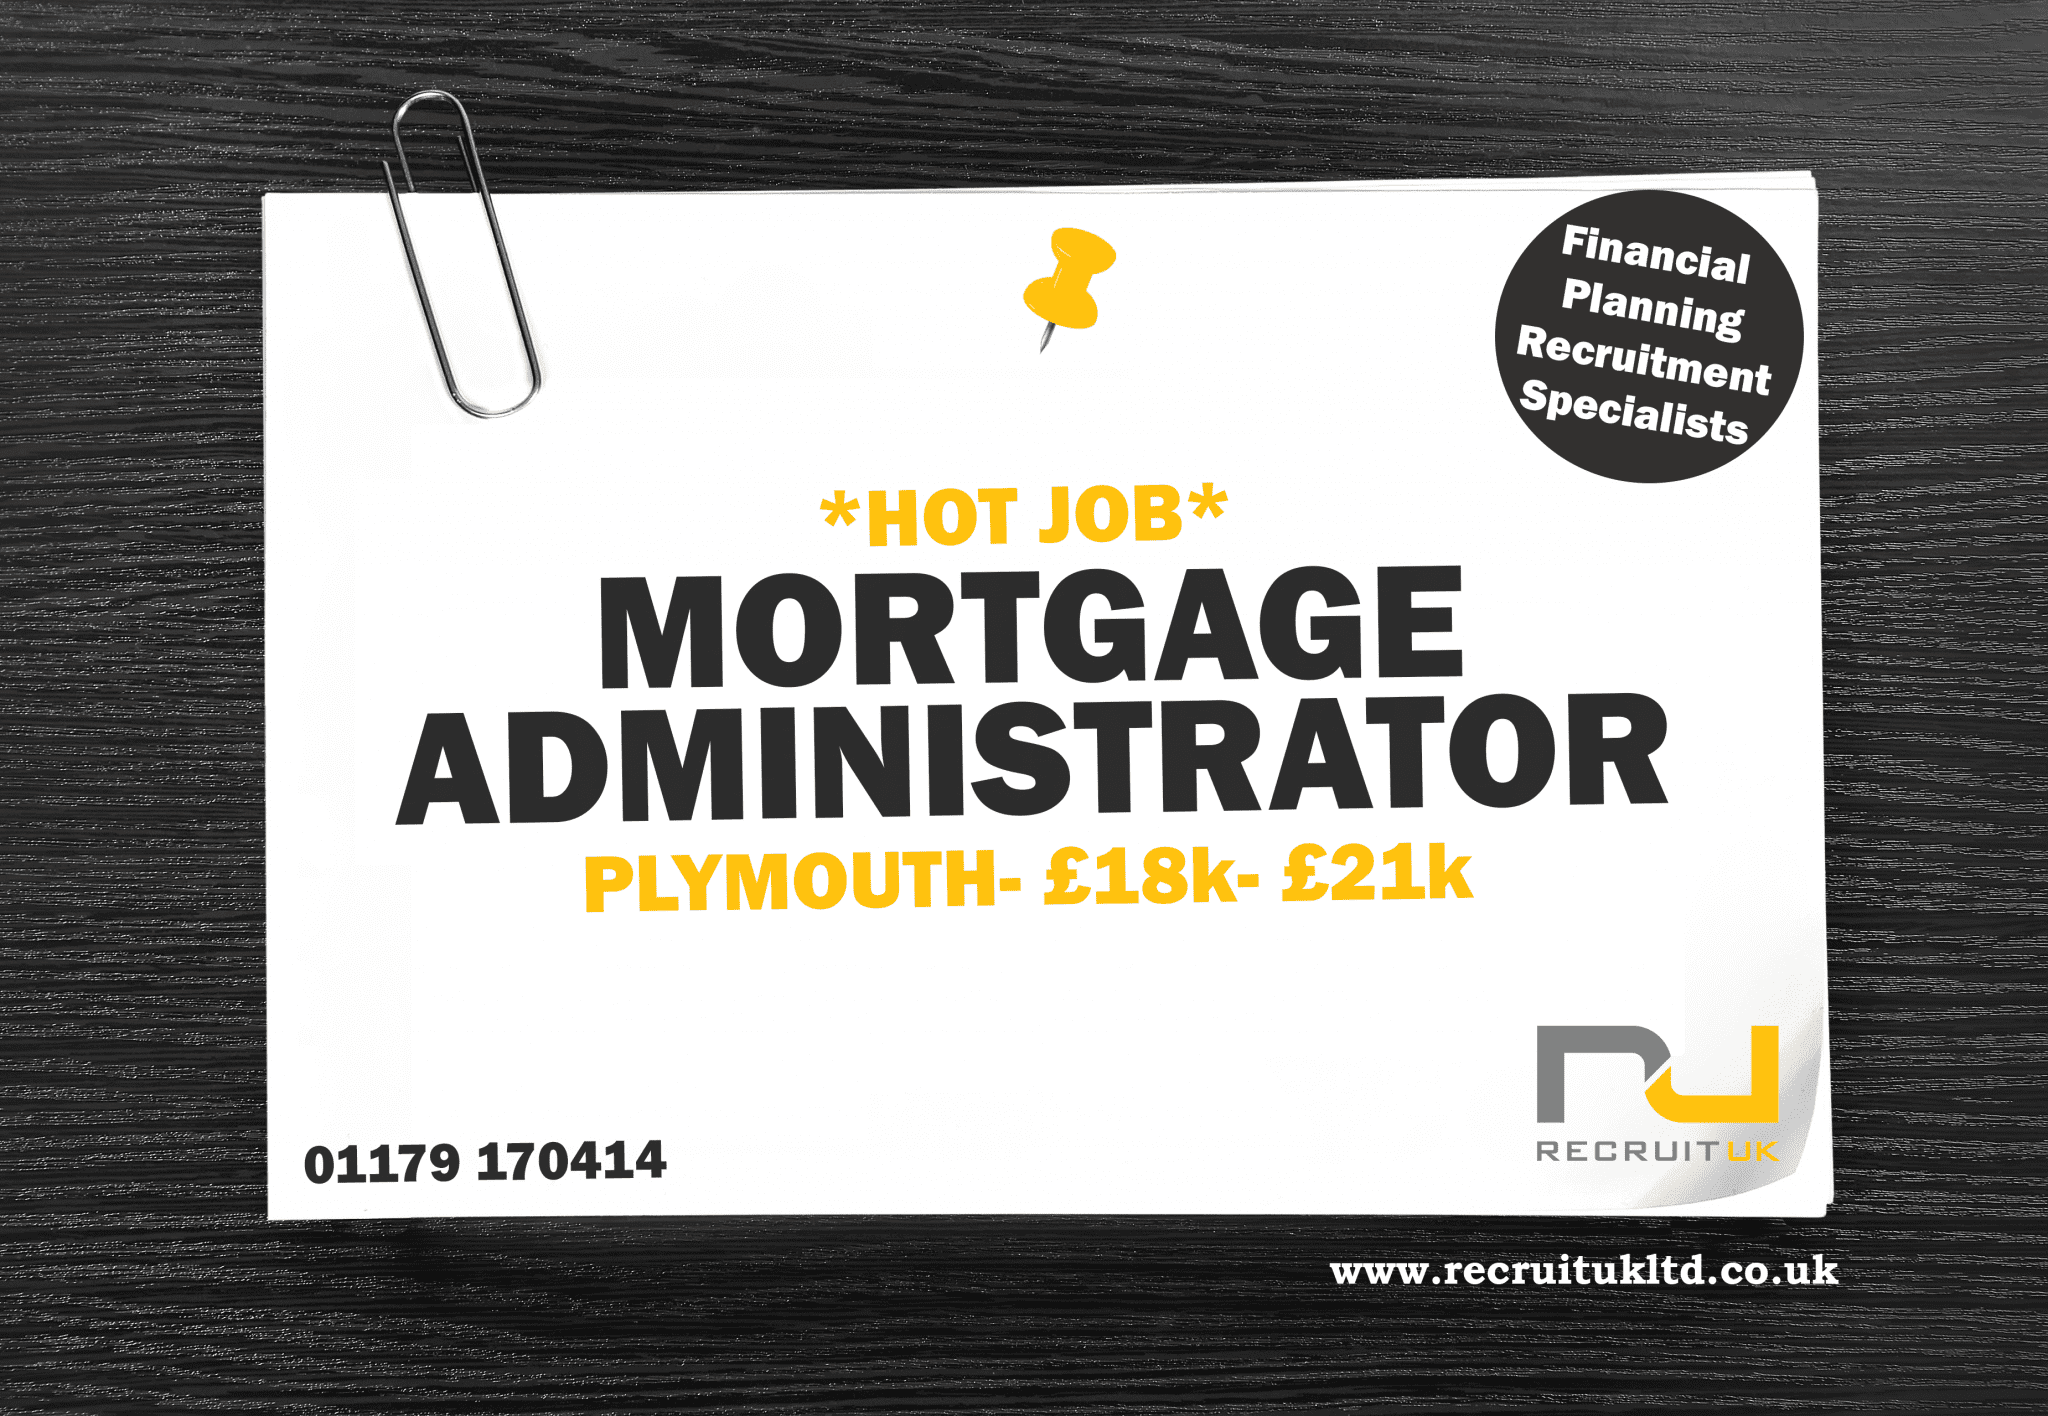 Mortgage Administrator - Plymouth